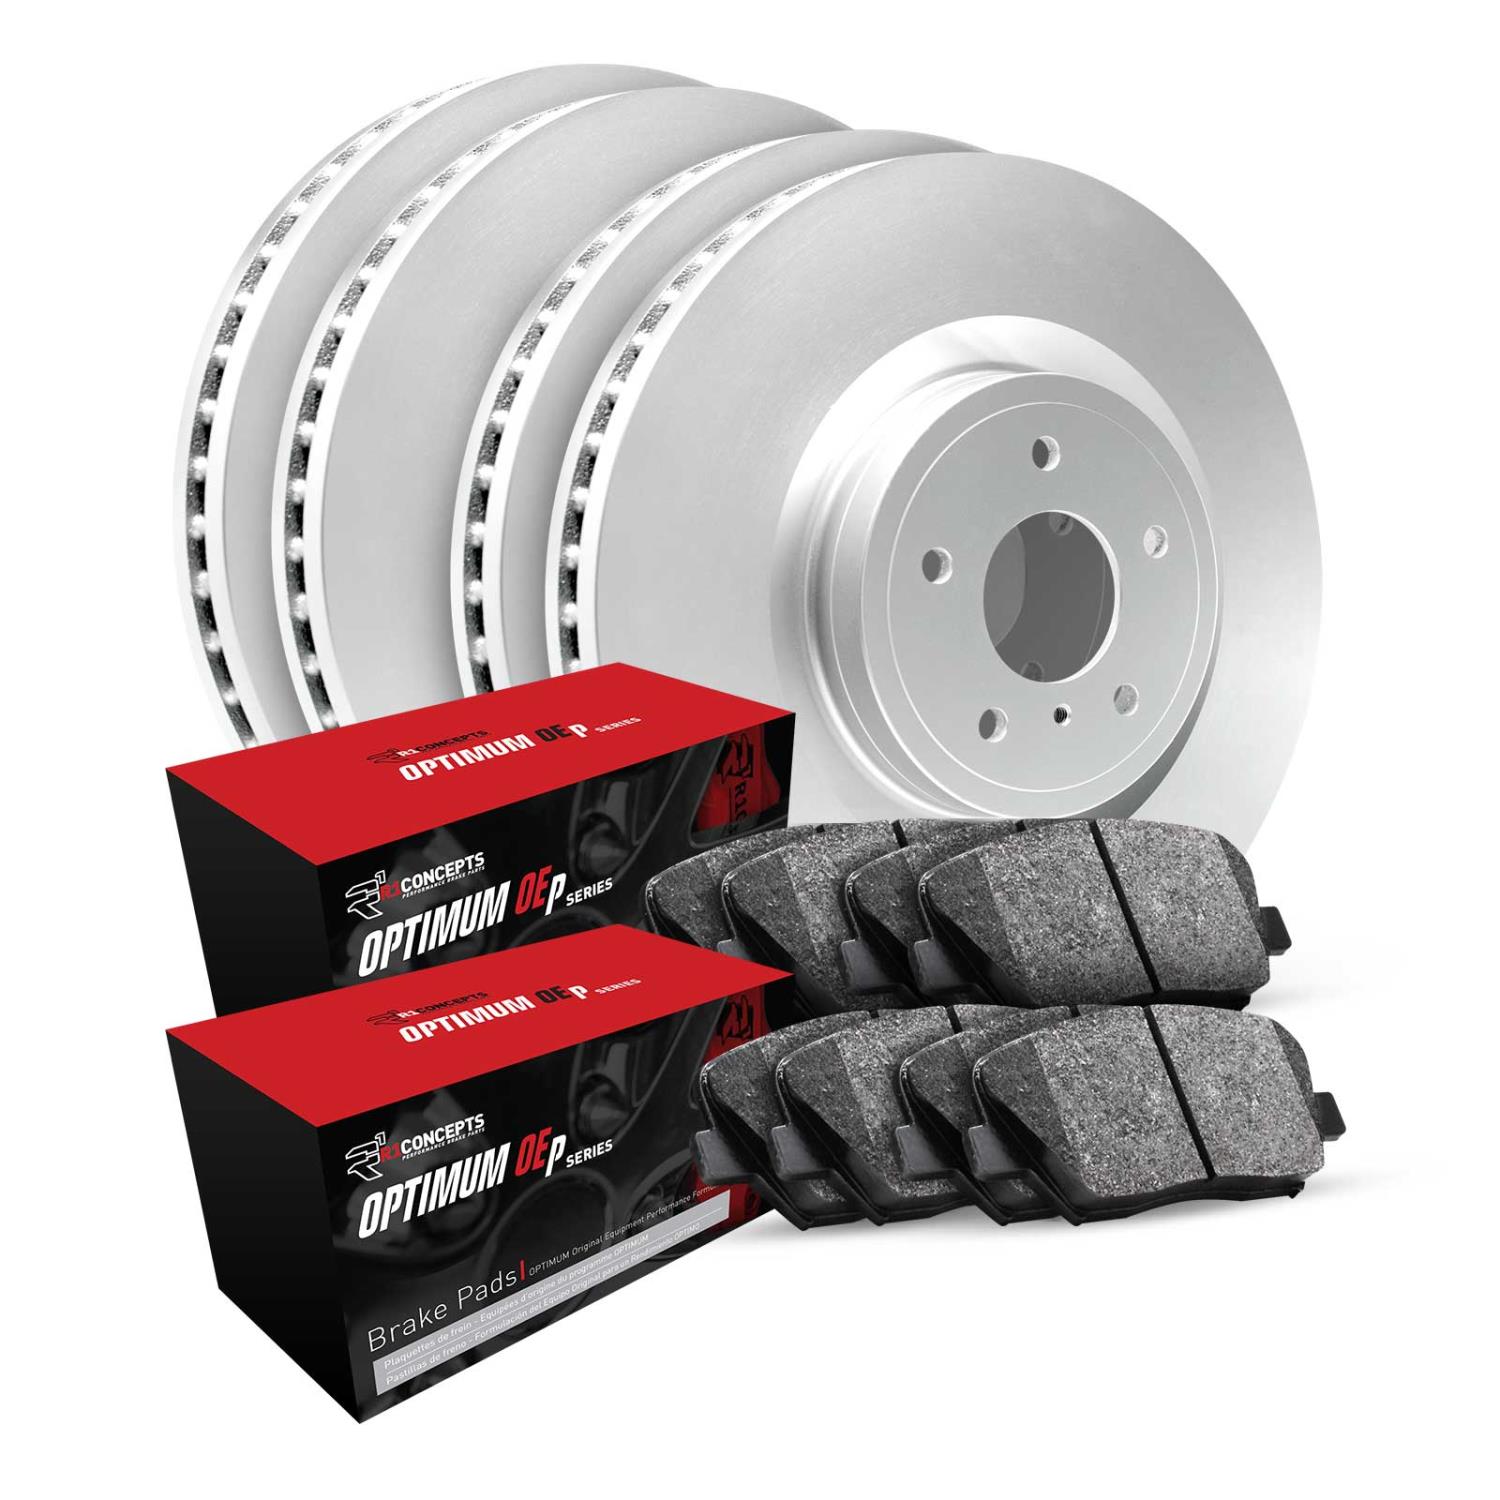 GEO-Carbon Brake Rotor Set w/Optimum OE Pads, 2001-2004 Fits Multiple Makes/Models, Position: Front & Rear